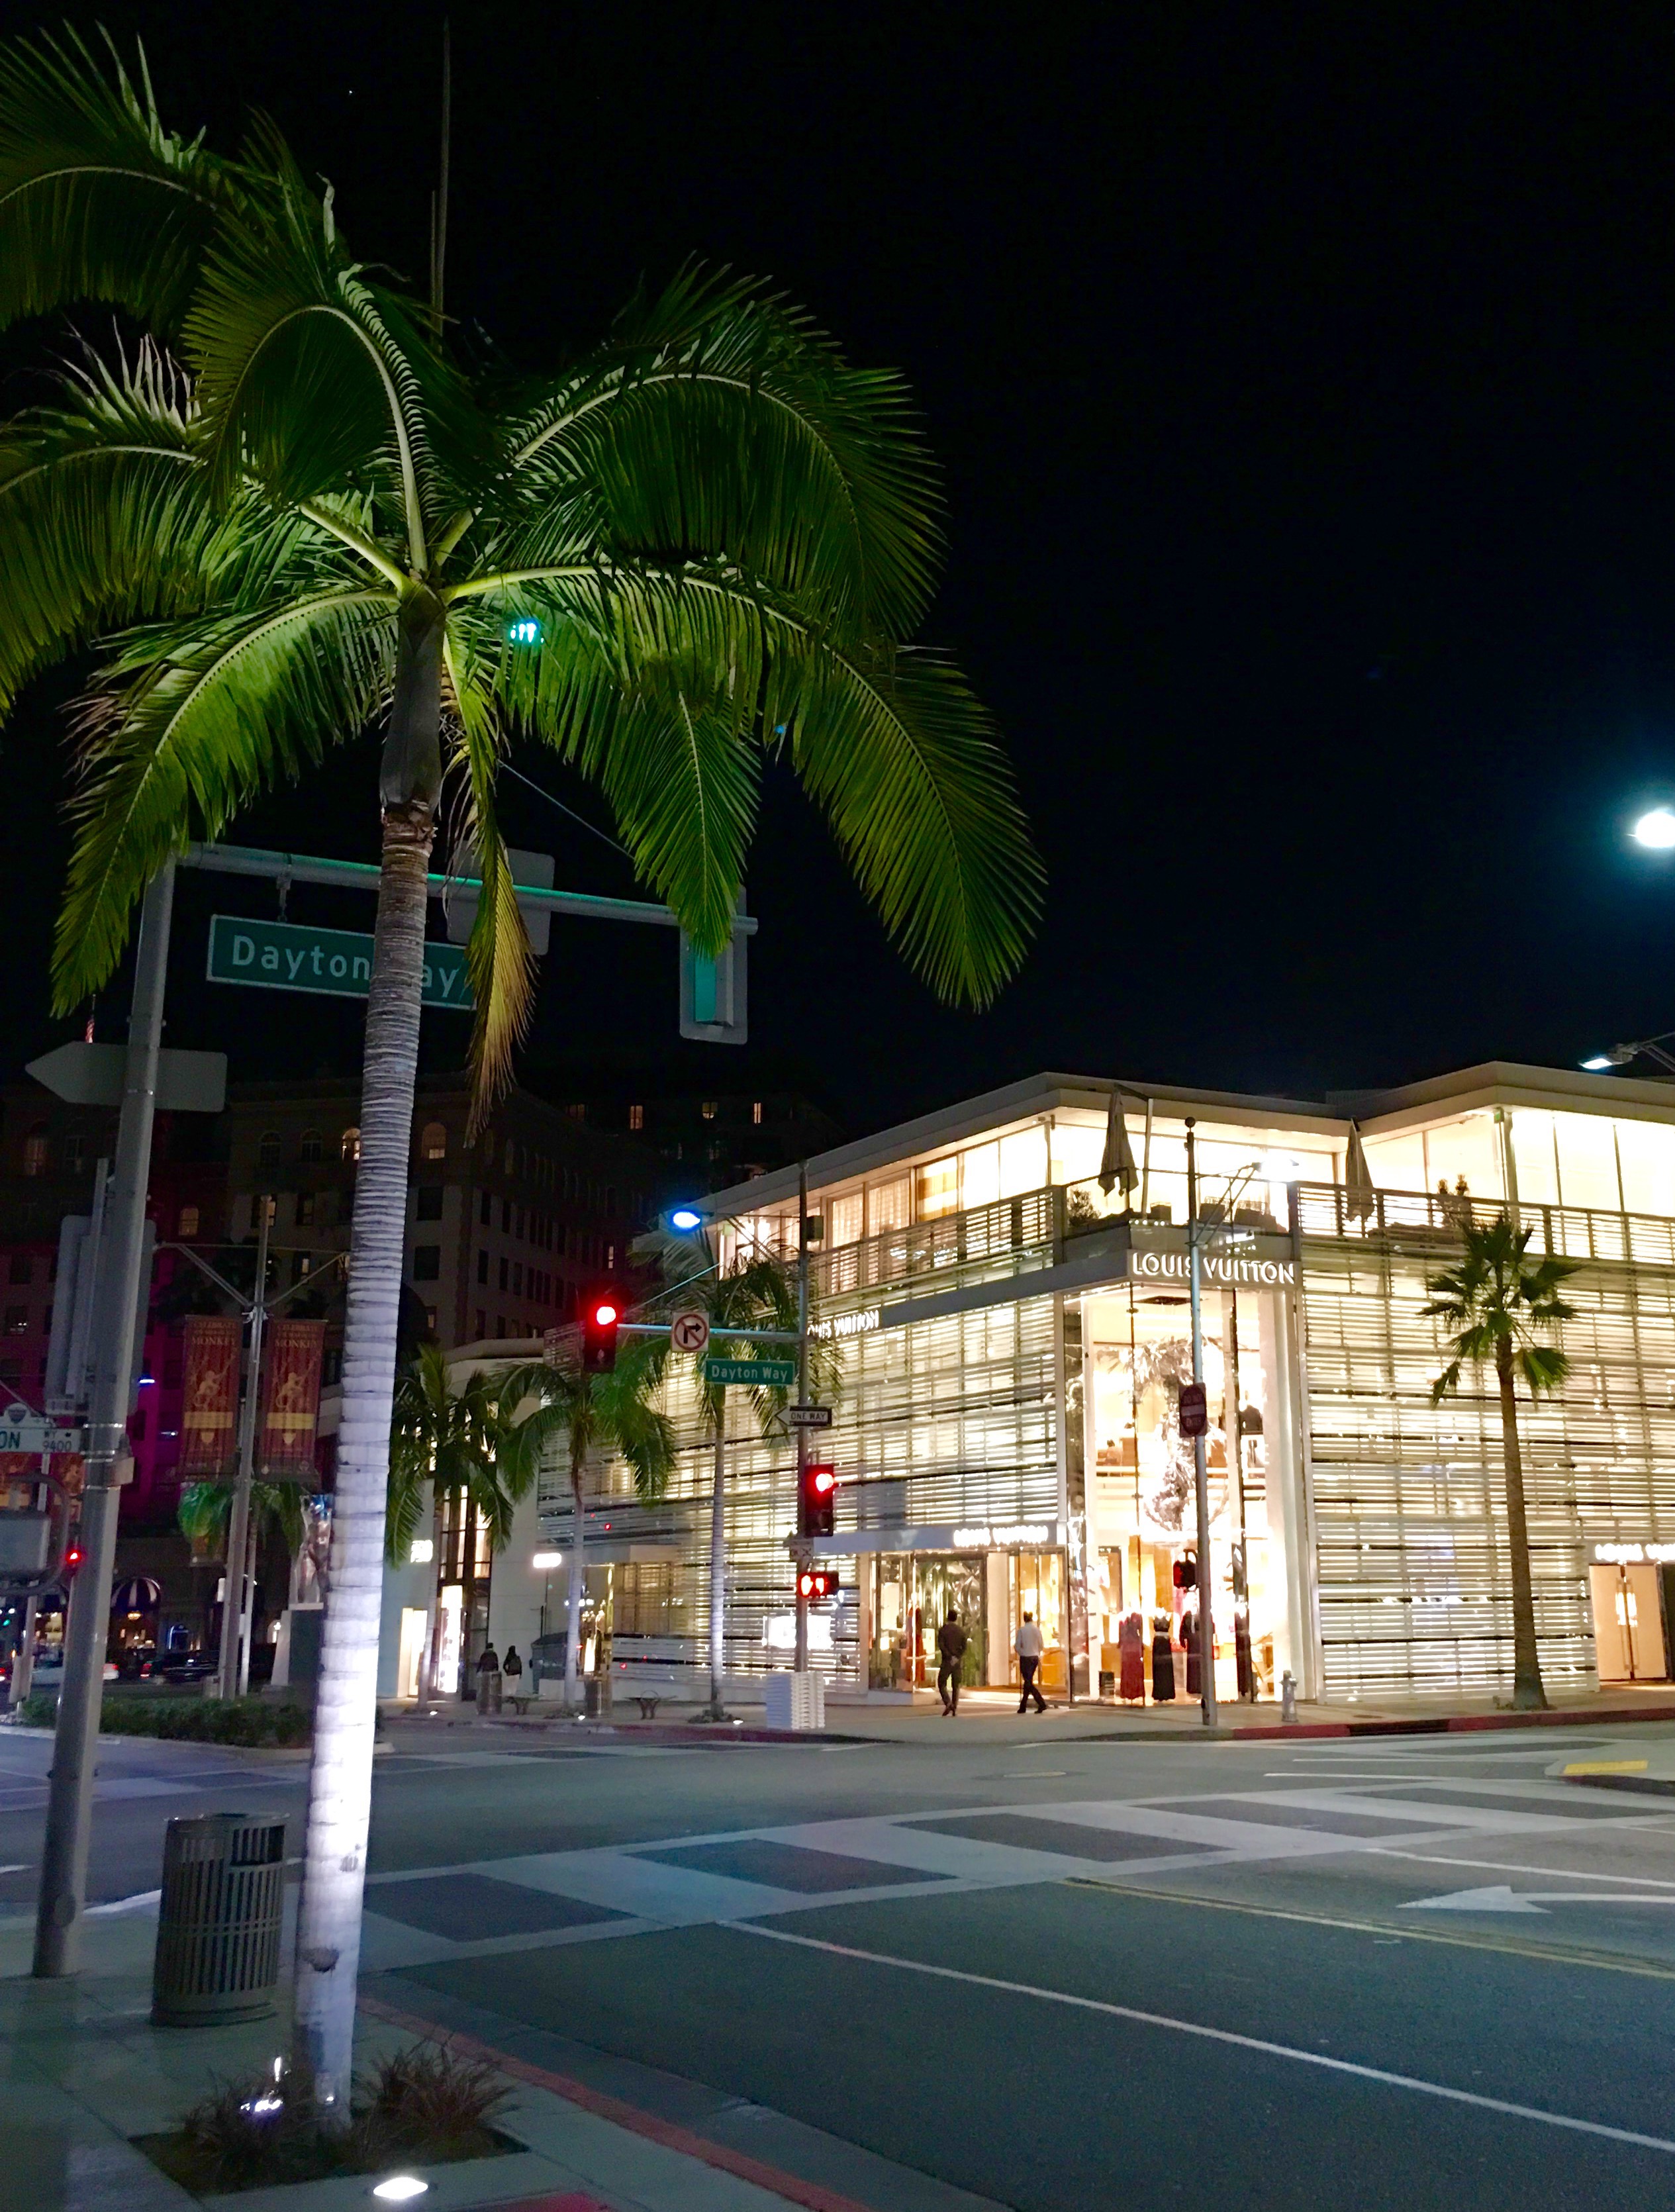 World Class Shopping on Rodeo Drive in Beverly Hills.